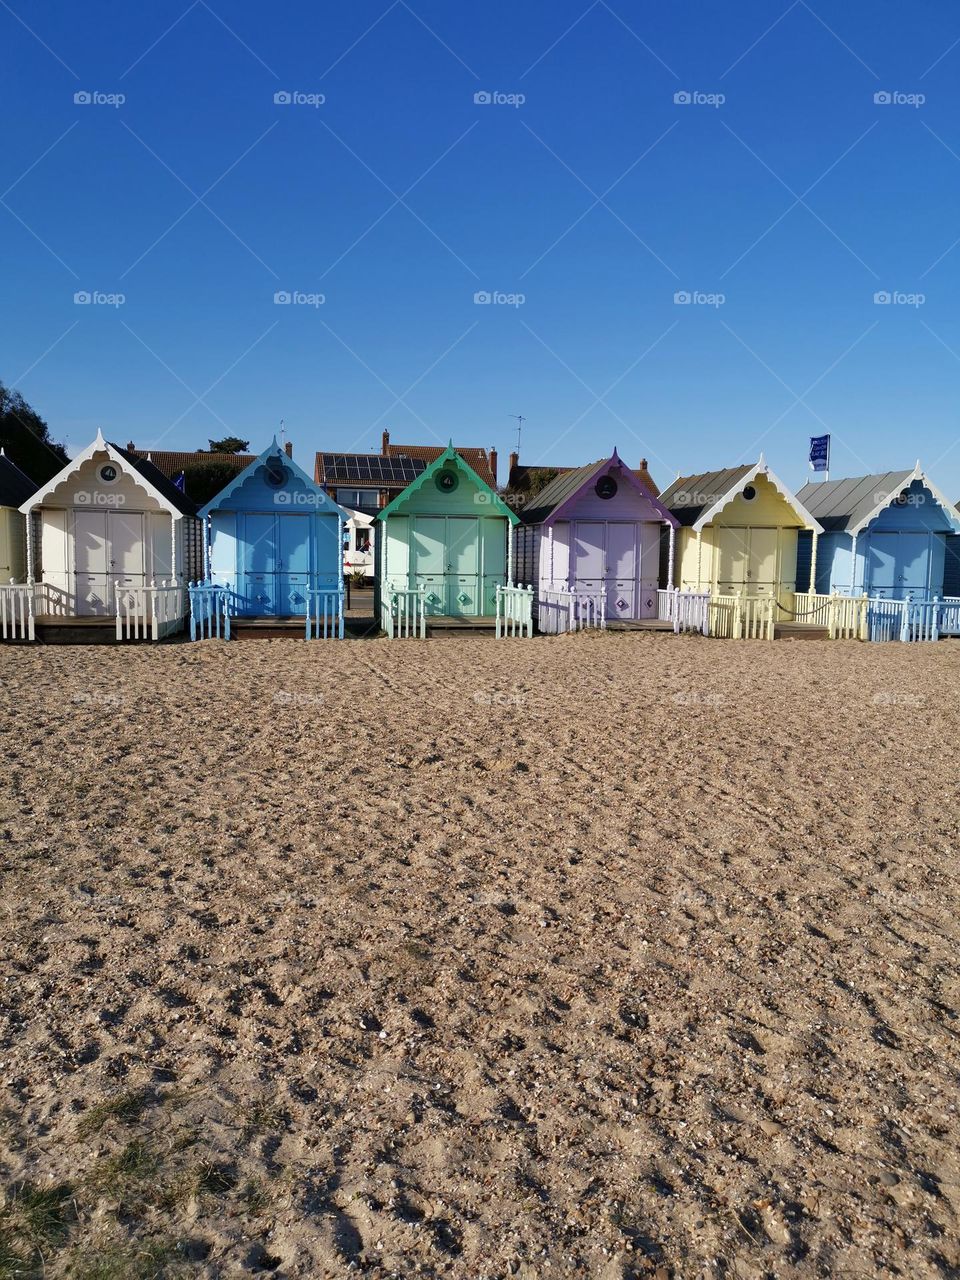 Summer in UK. Colourful beach houses. Sunny day.